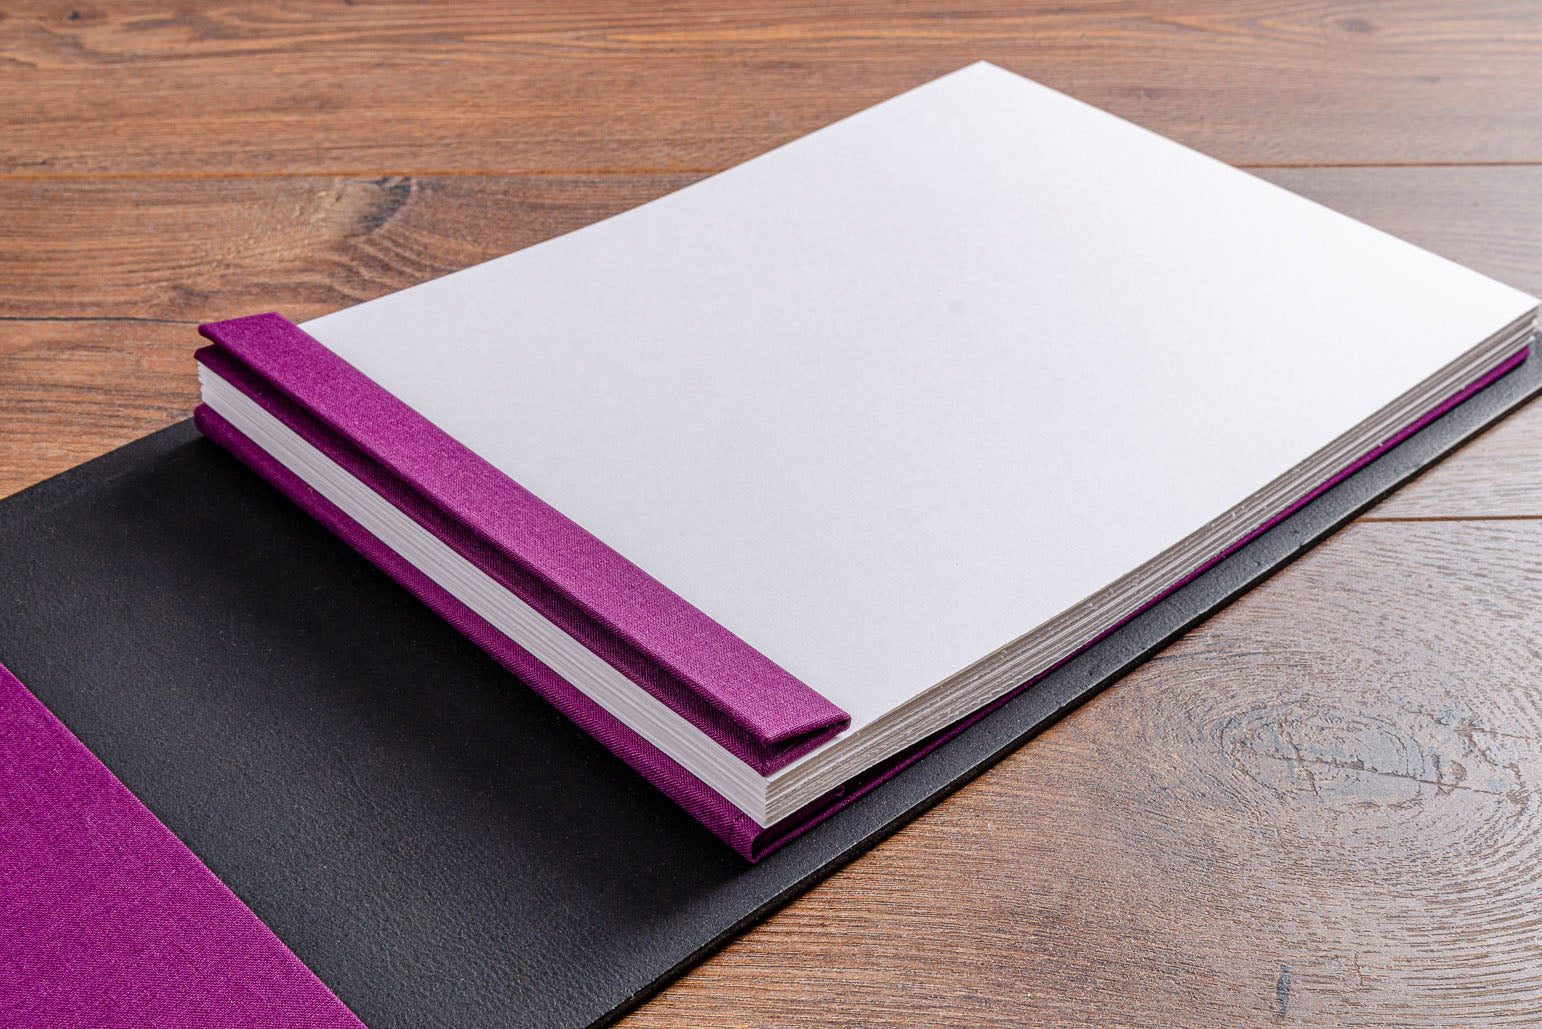 Screw post binding mechanism with white A4 landscape pages in leather guest book